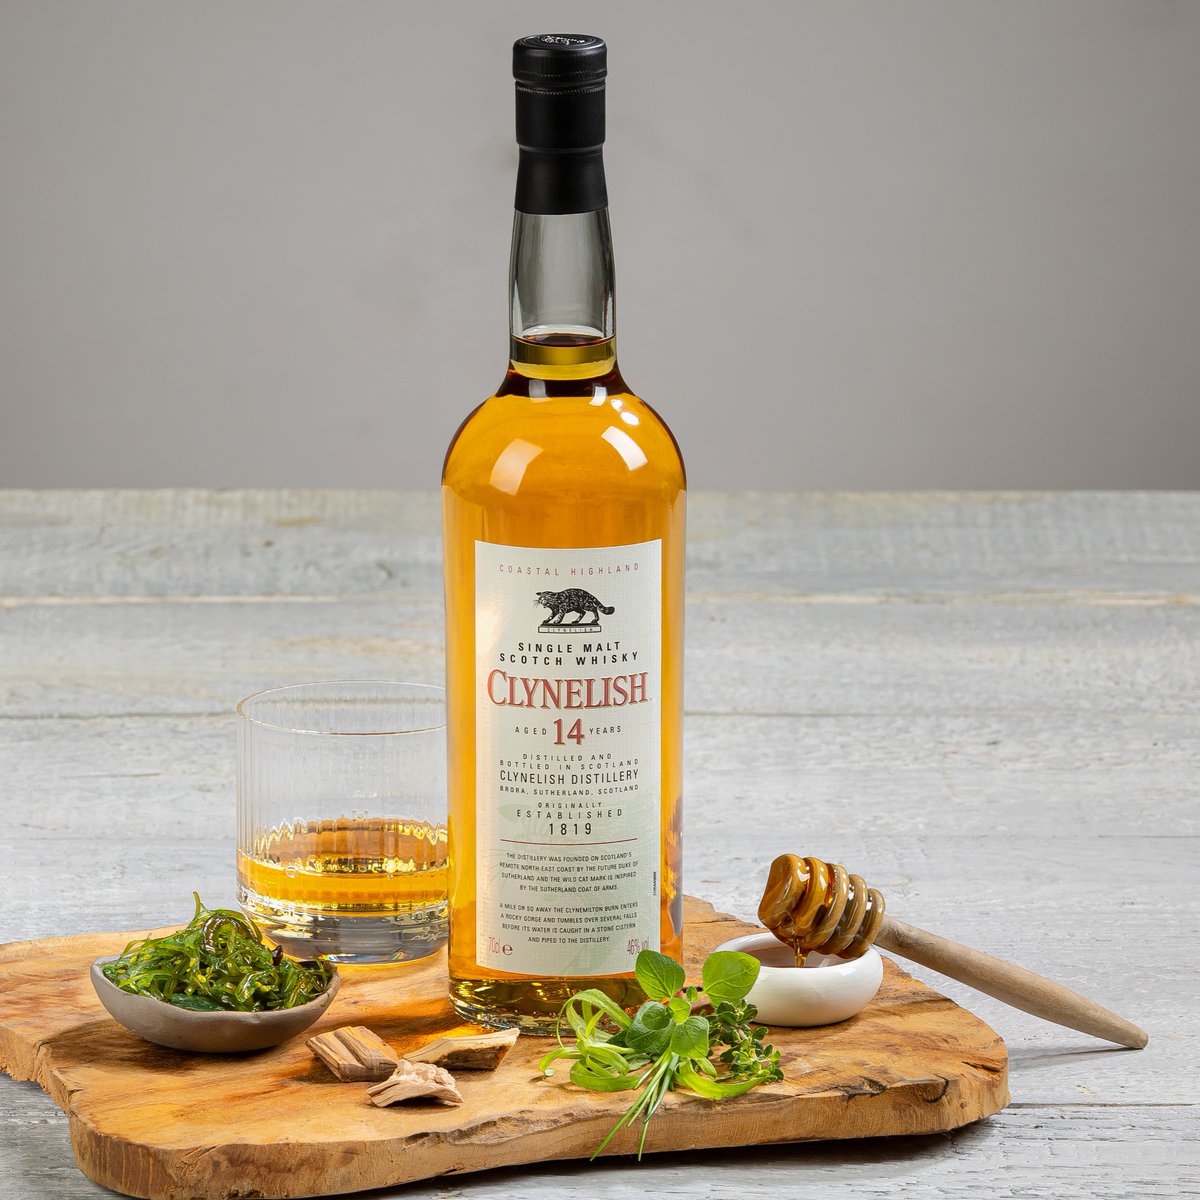 Staff Favourites for Father's Day - Clynelish 14 Year Old ➡️ bit.ly/4bXHJfi 🔗

Selected by Liz, 'I absolutely adore Clynelish 14. It's an all-time classic, a very easygoing dram that will never cease to amaze me with every sip.'